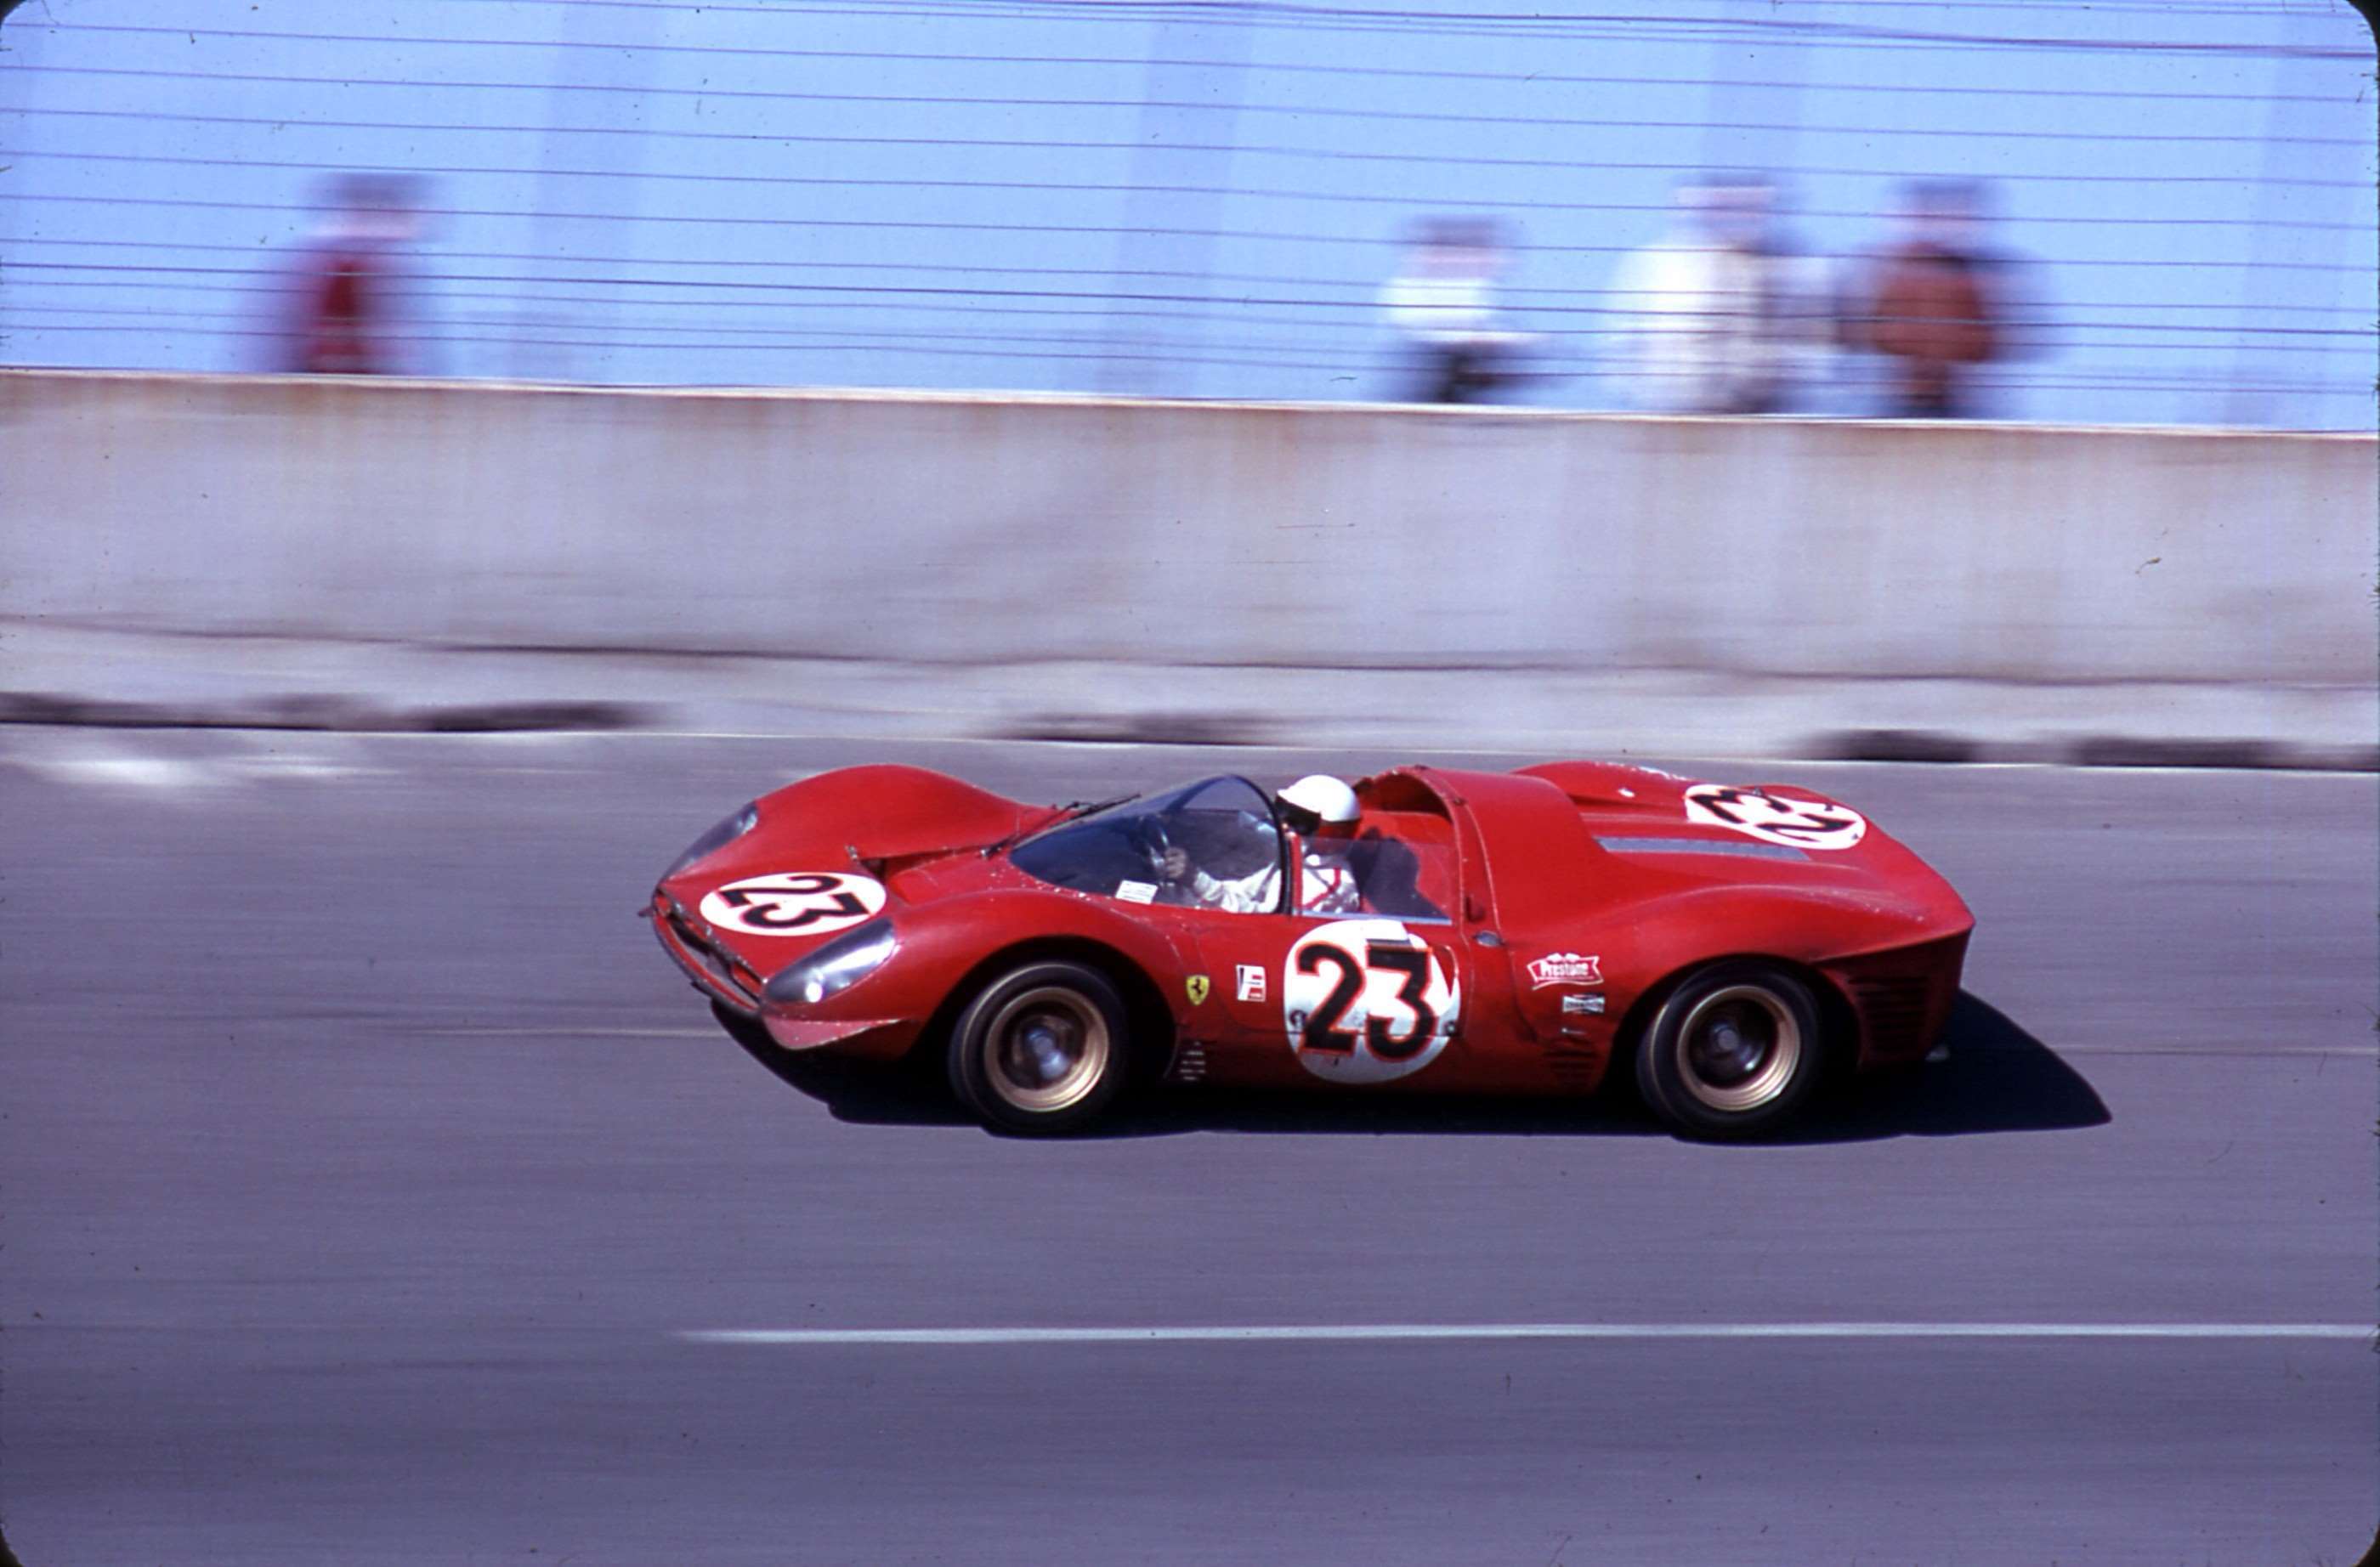 How much shape might sir require in a sports-racing classic?  Lorenzo Bandini up the wall at Daytona 1967 in the winning Ferrari 330P4 - photo by his own team manager, Franco Lini.